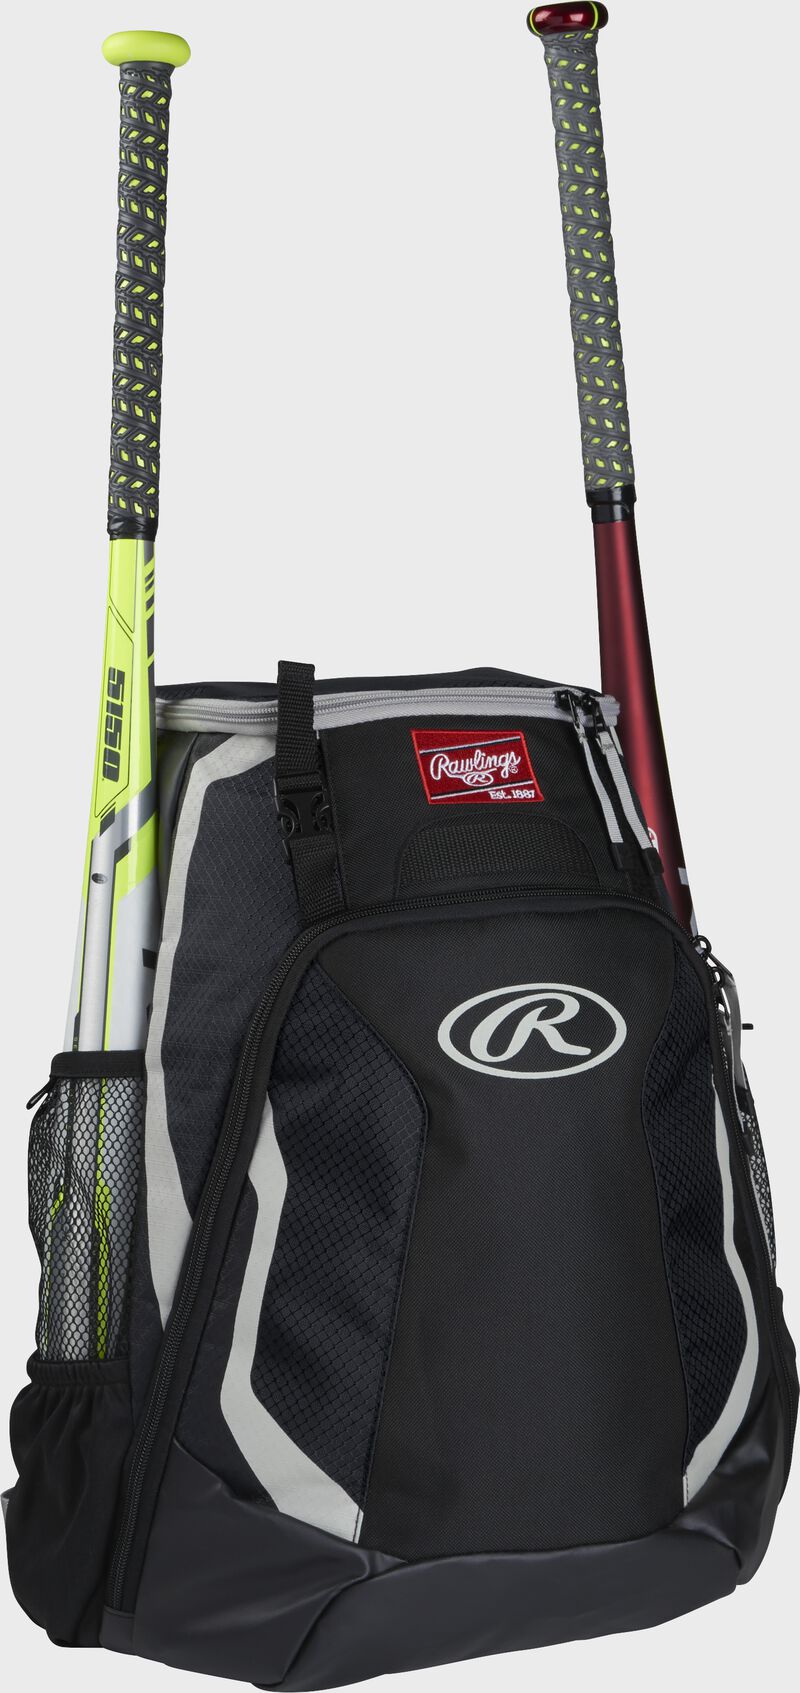 Right side of a black R500 Rawlings baseball backpack with a white bat in the bat sleeve